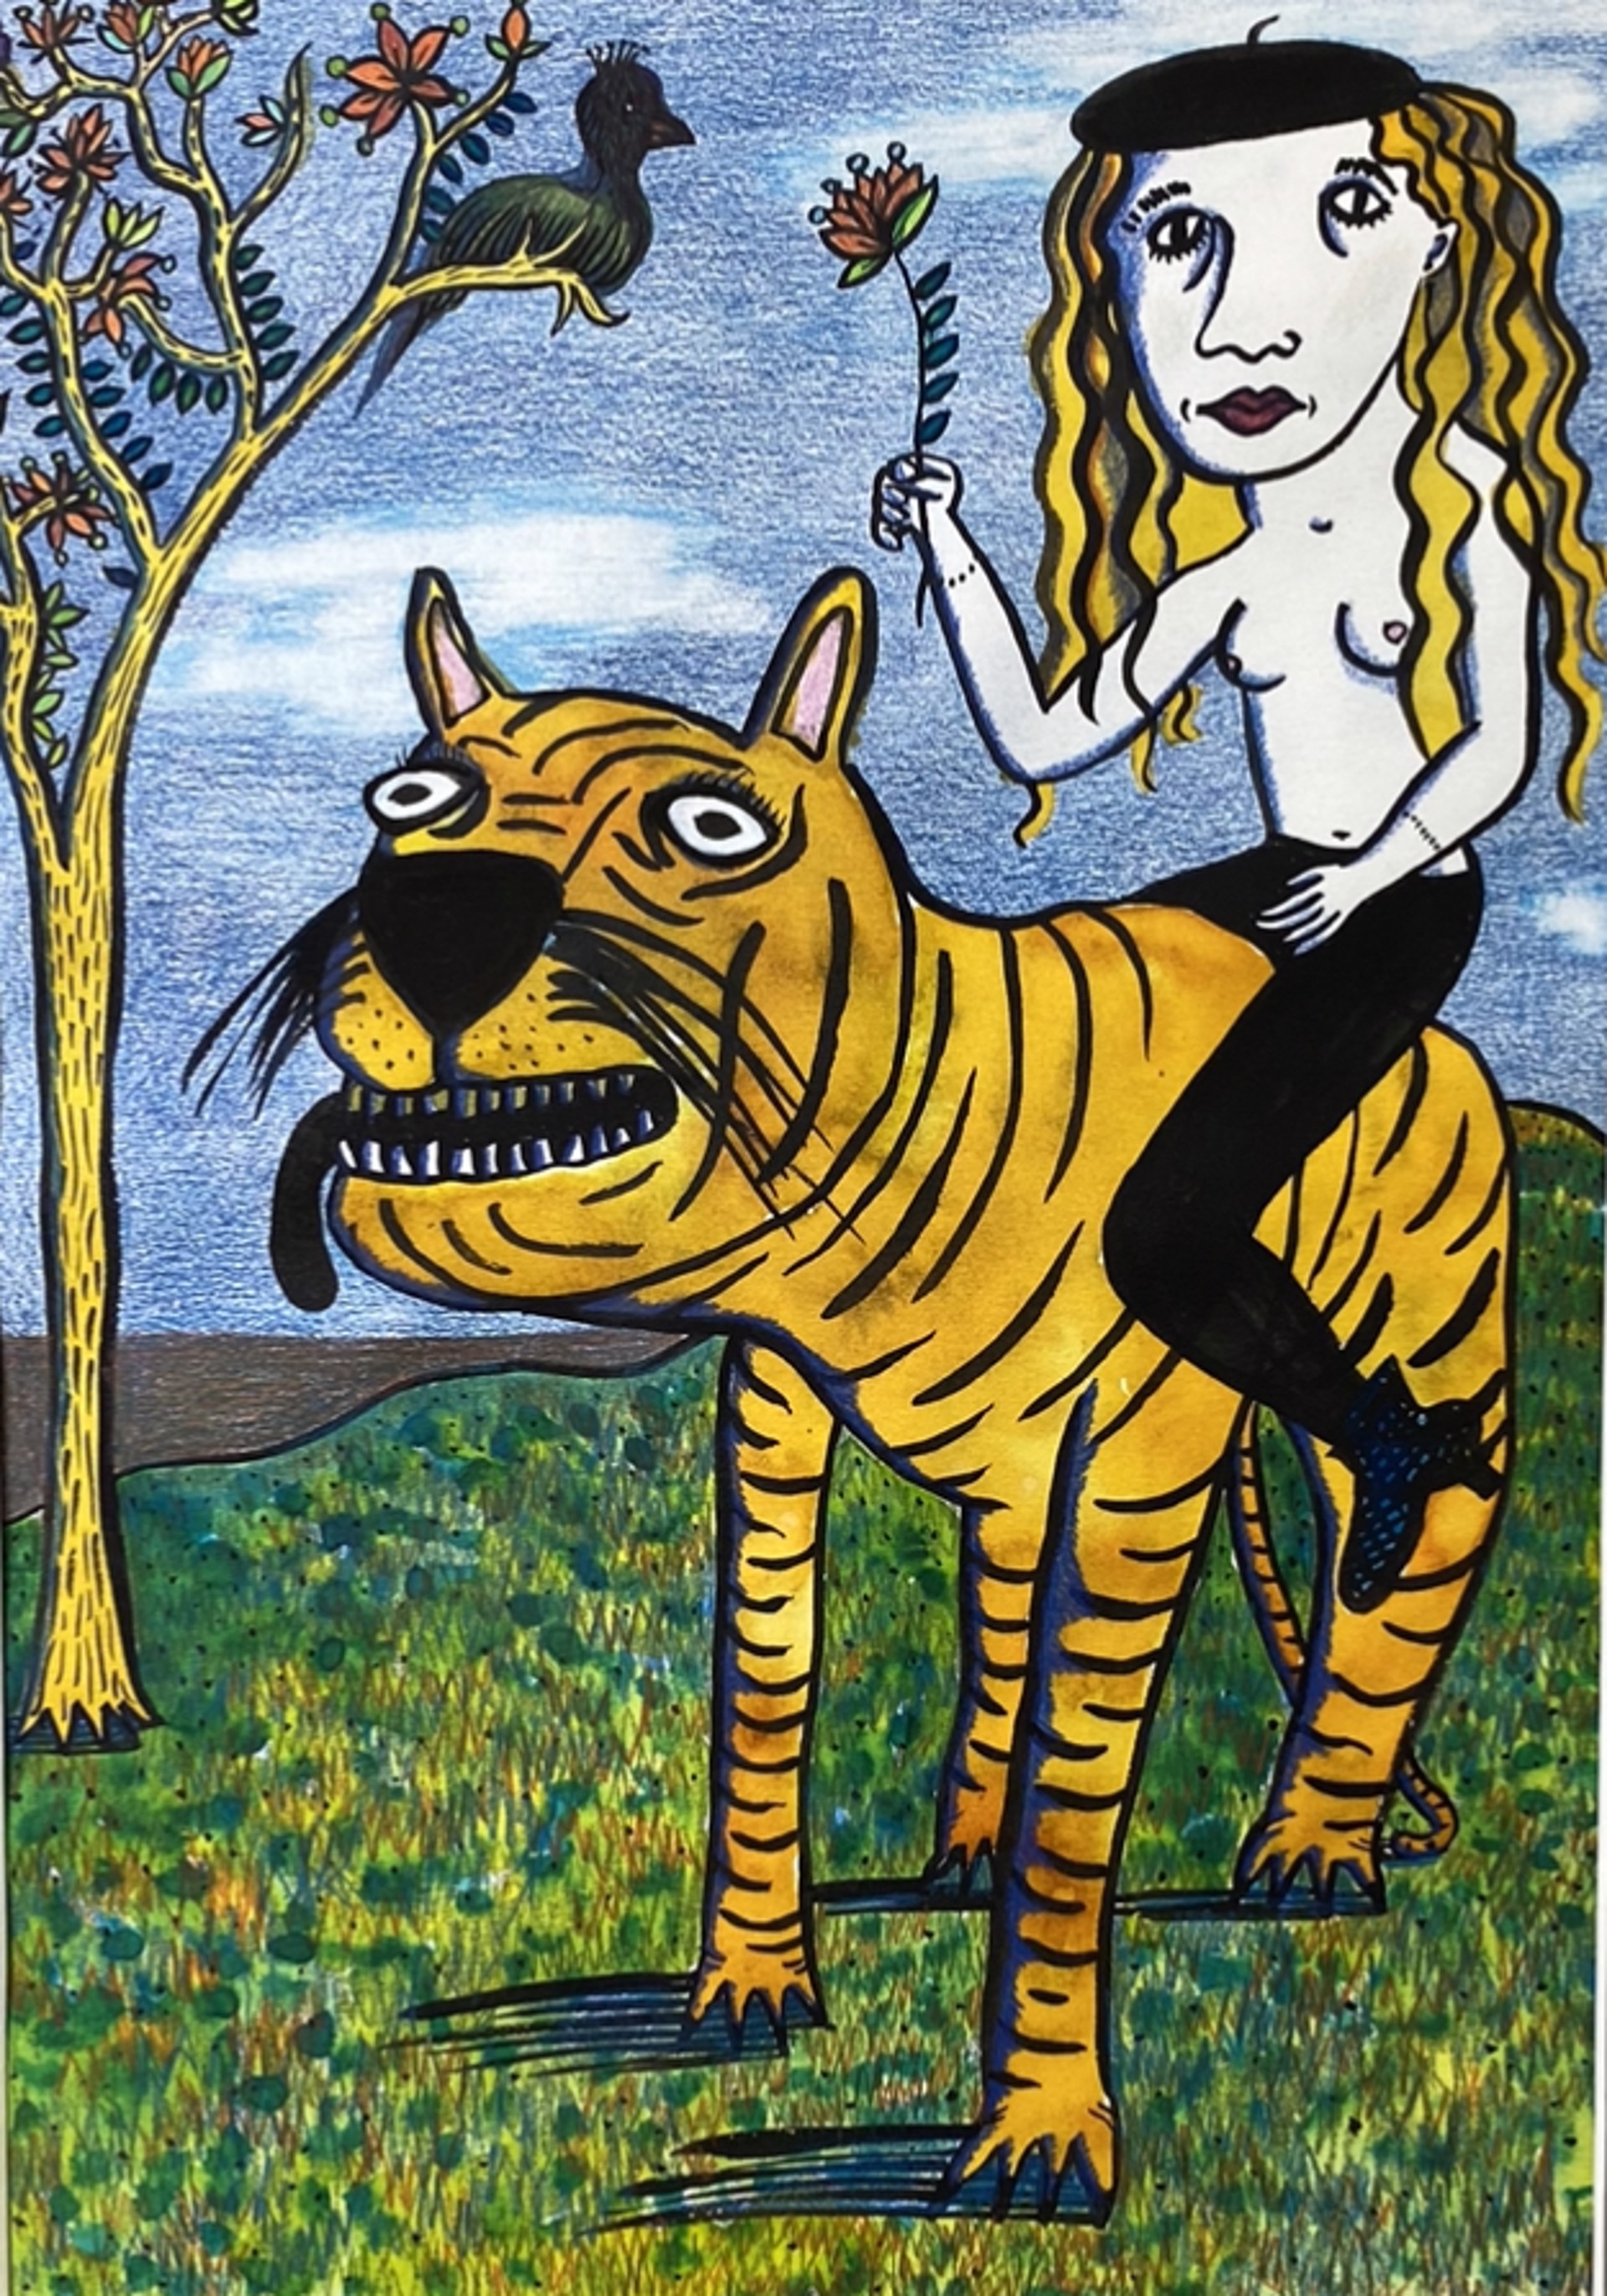 Lost Girl Riding a Wooden Tiger by Jill Slaymaker